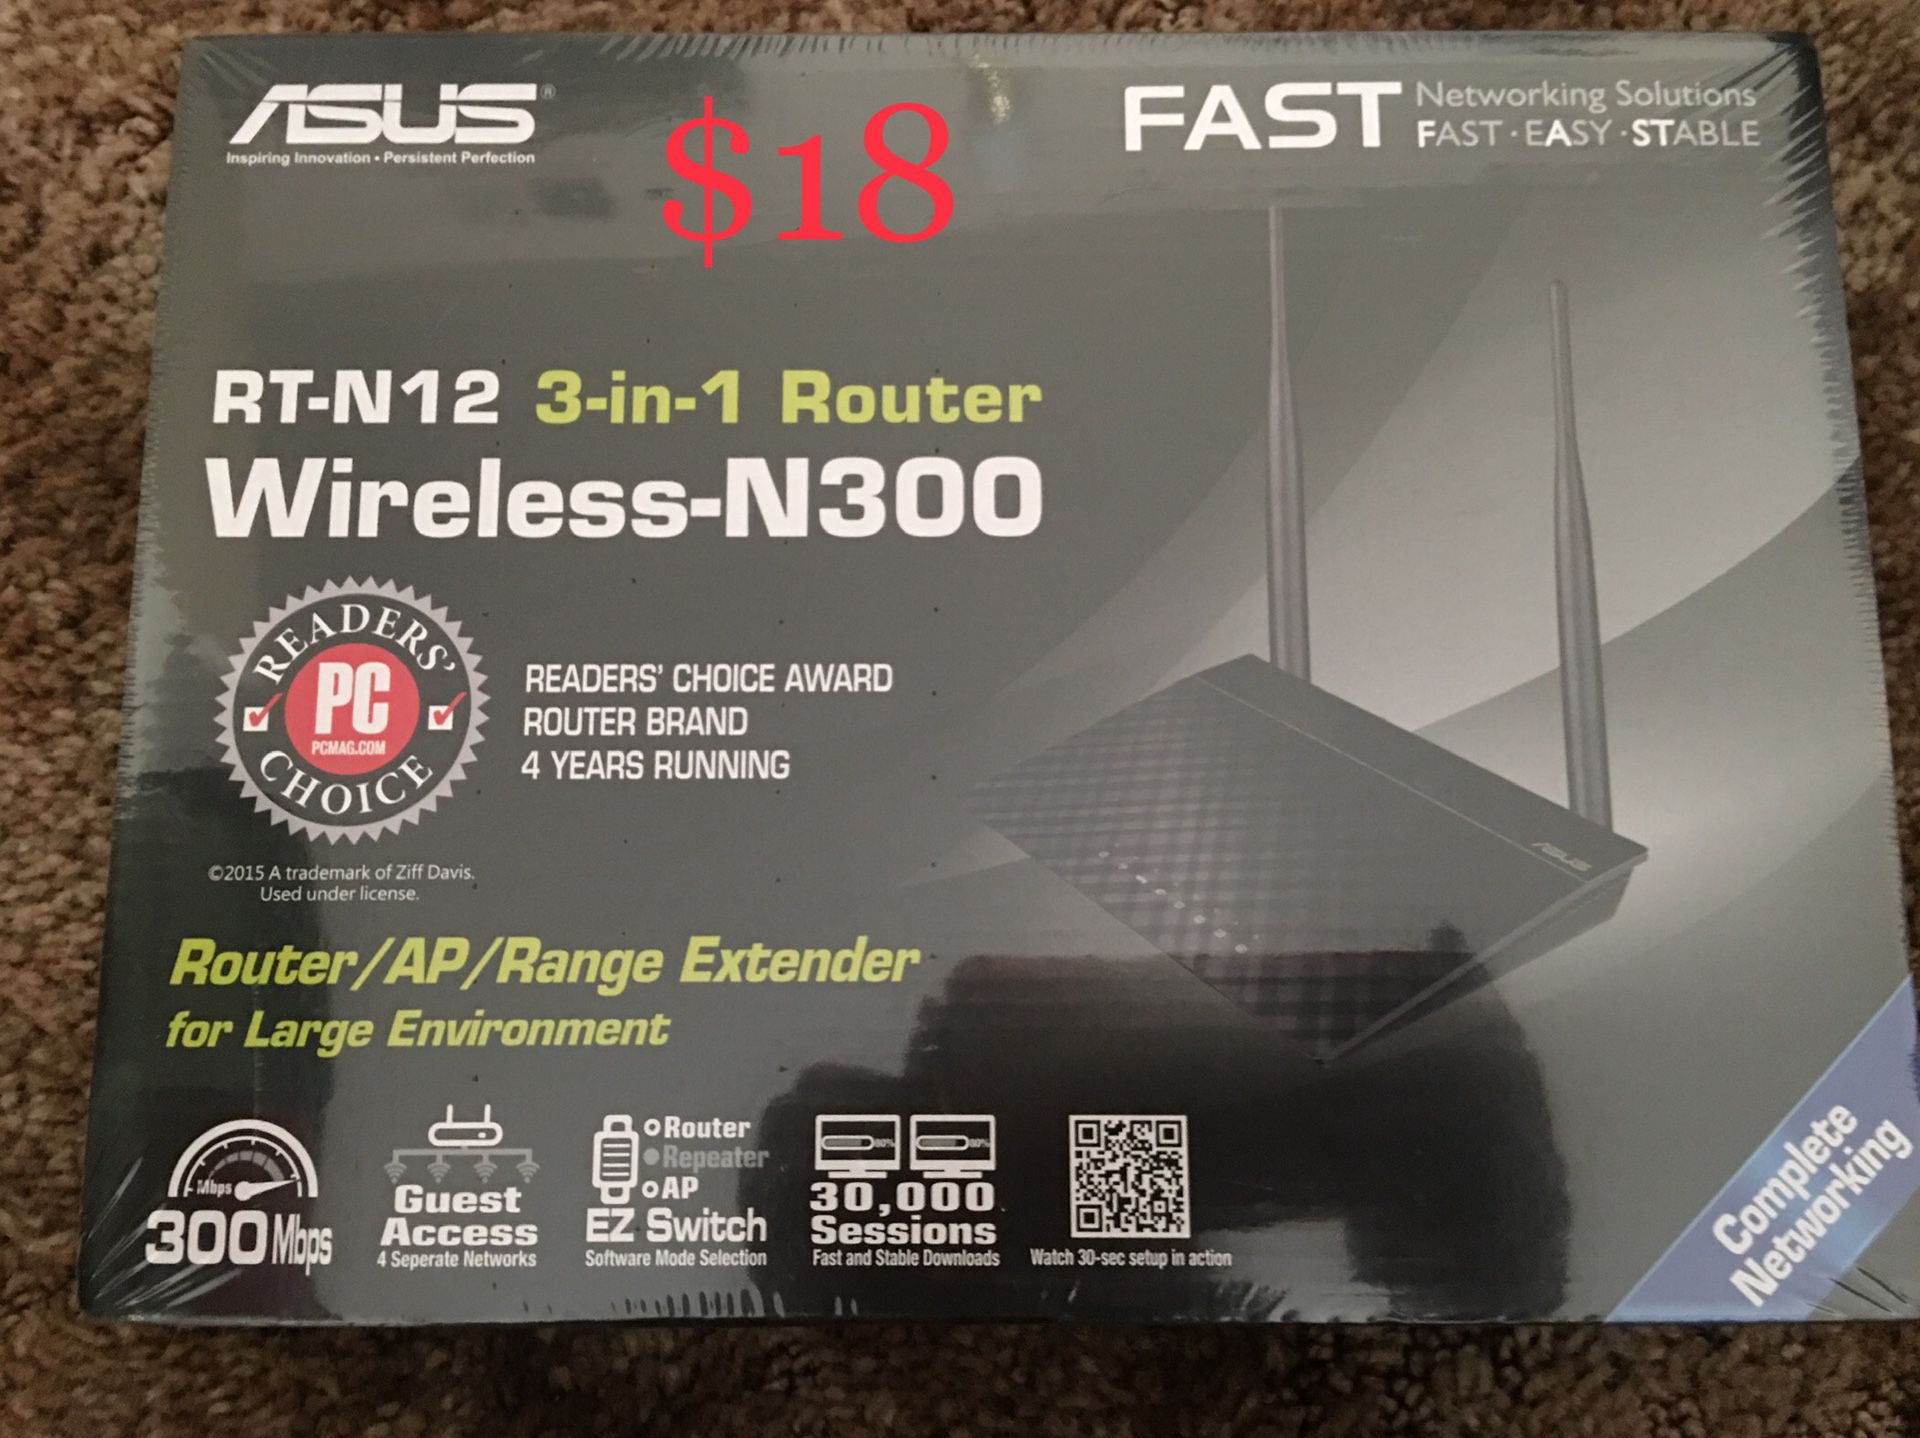 Asus WiFi router. New in box